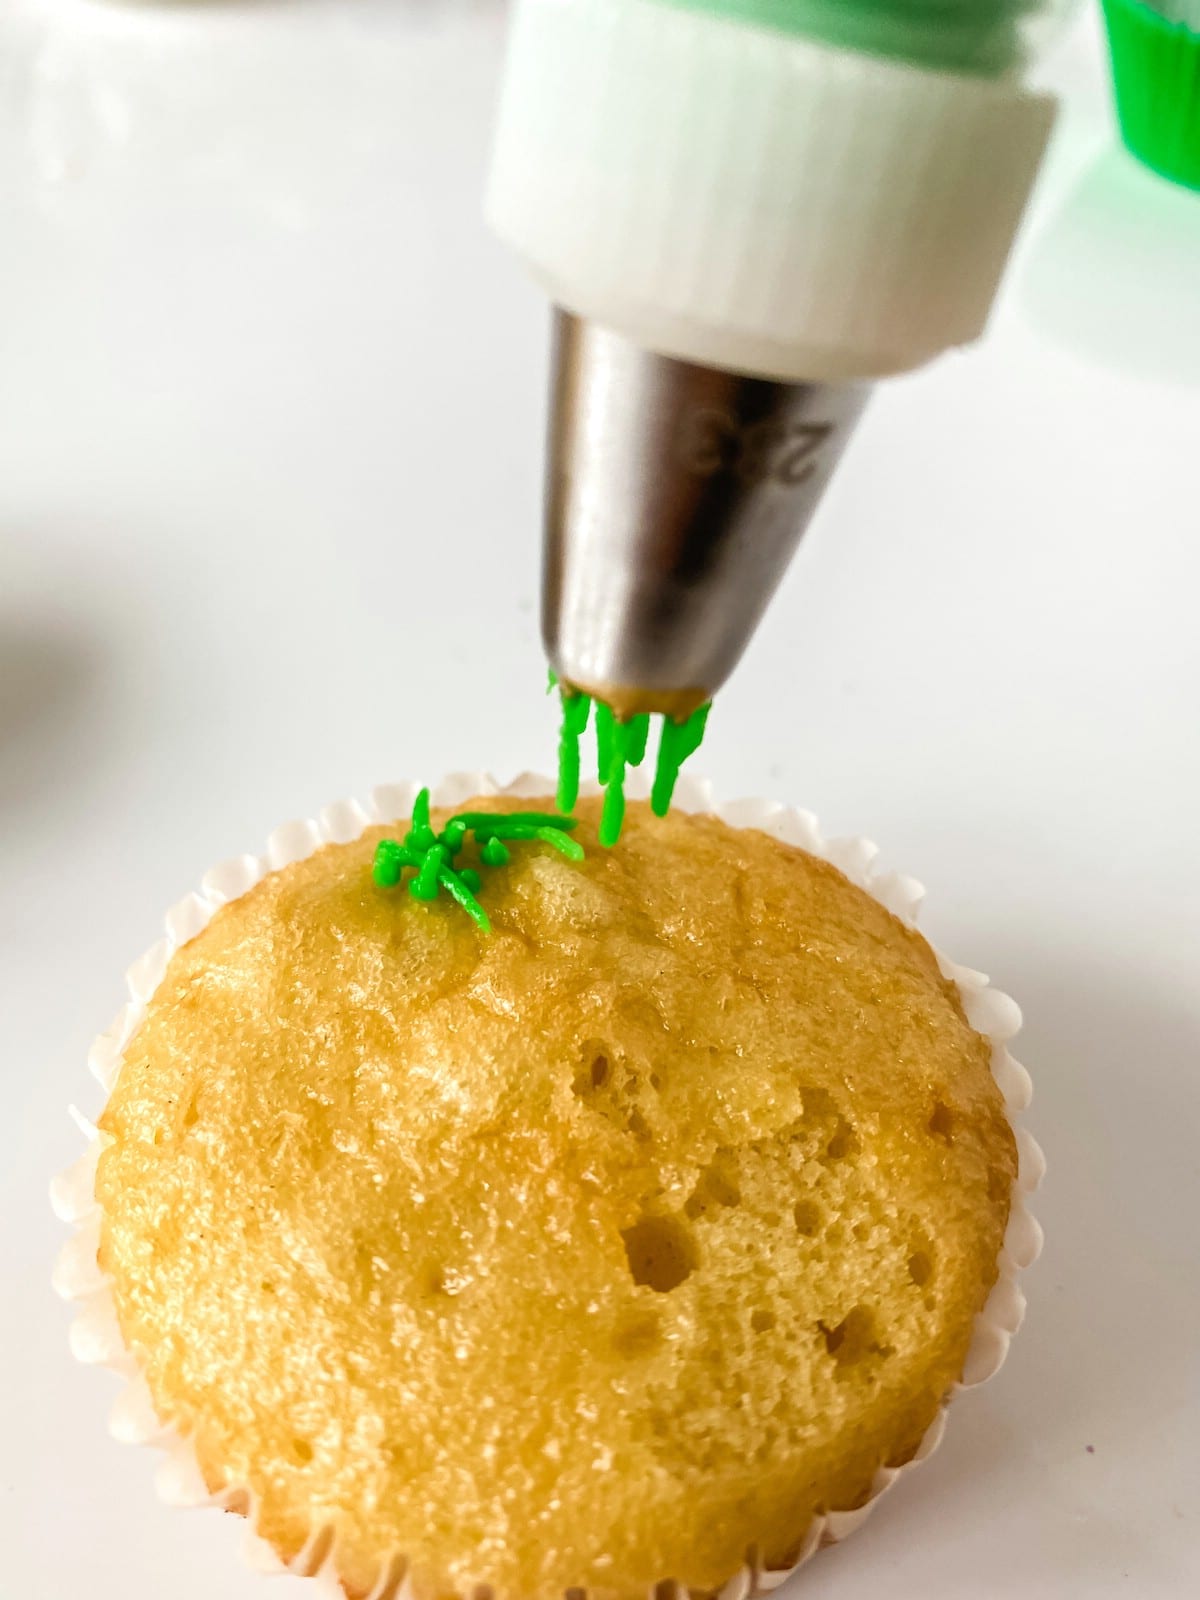 Adding grass using icing to top of cupcake